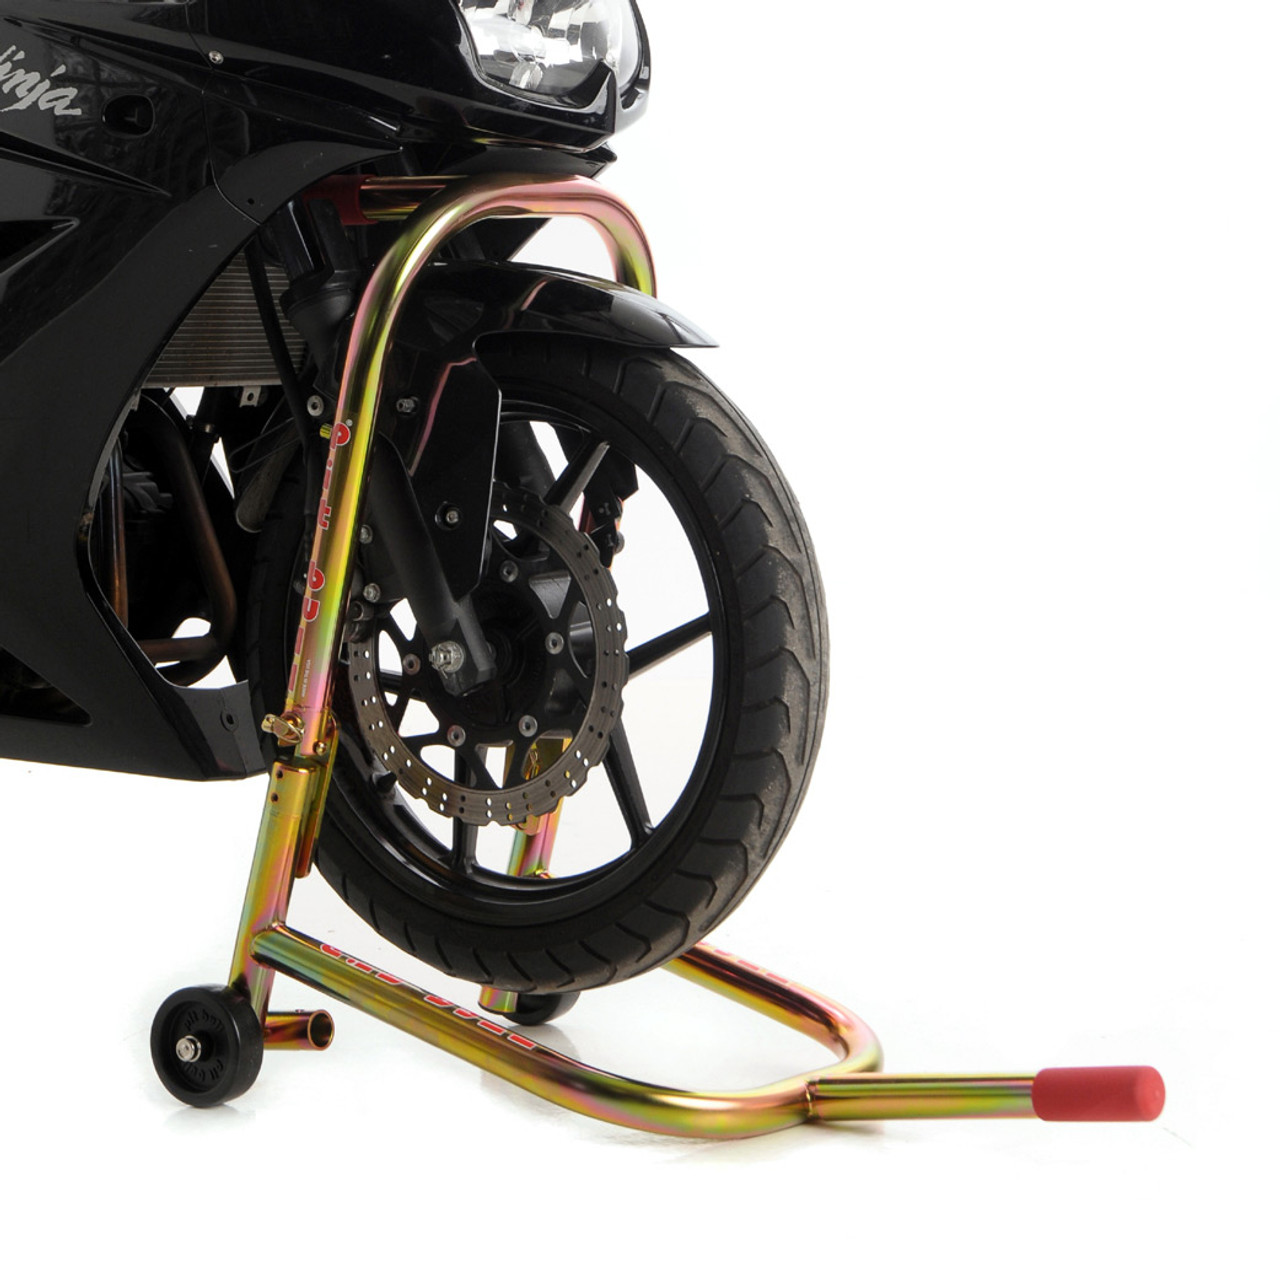 Pit Bull Hybrid Headlift Motorcycle Front Stand - Sportbike Track Gear